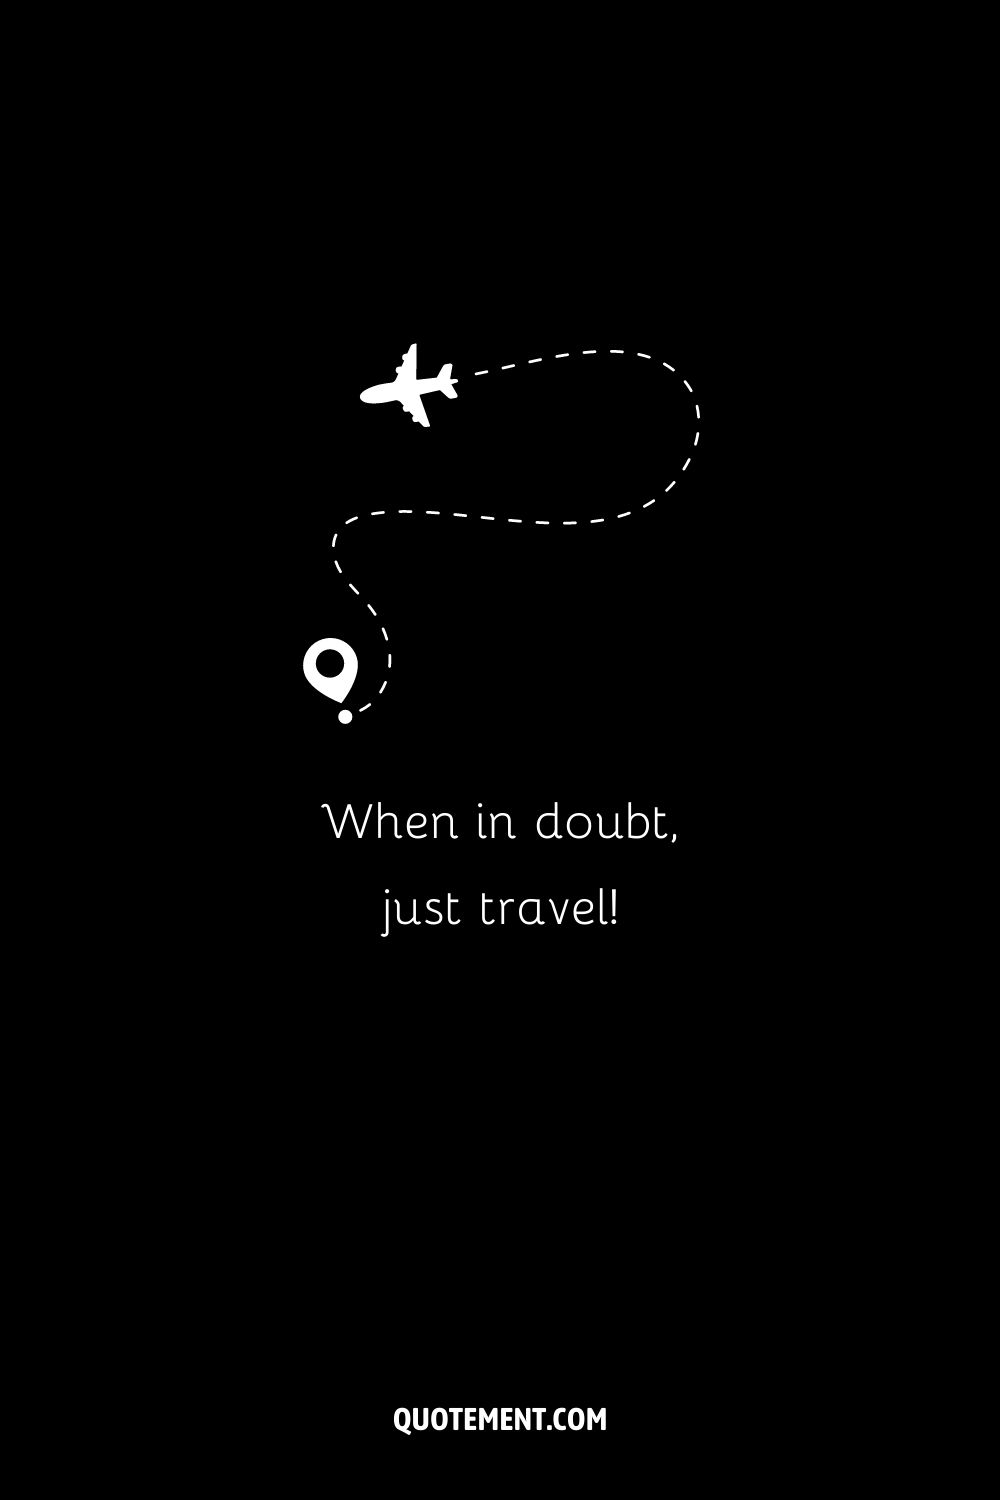 Cute travel caption idea and a minimalistic illustration of a plane and target place